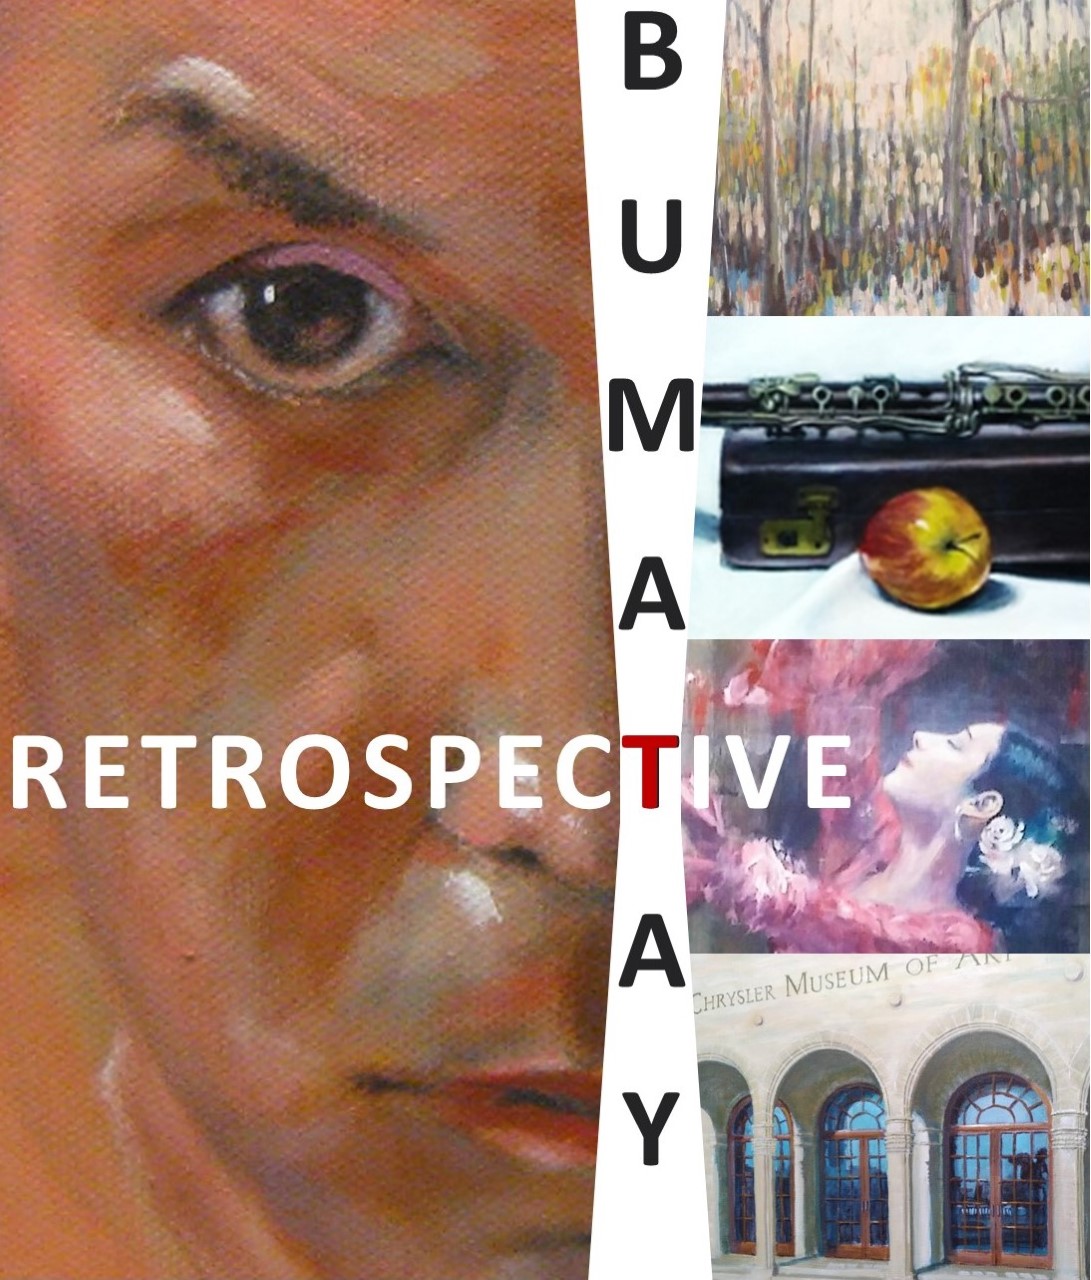 Image of artist retrospective announcement included a portrait painting on the left and several small paintings on the righ